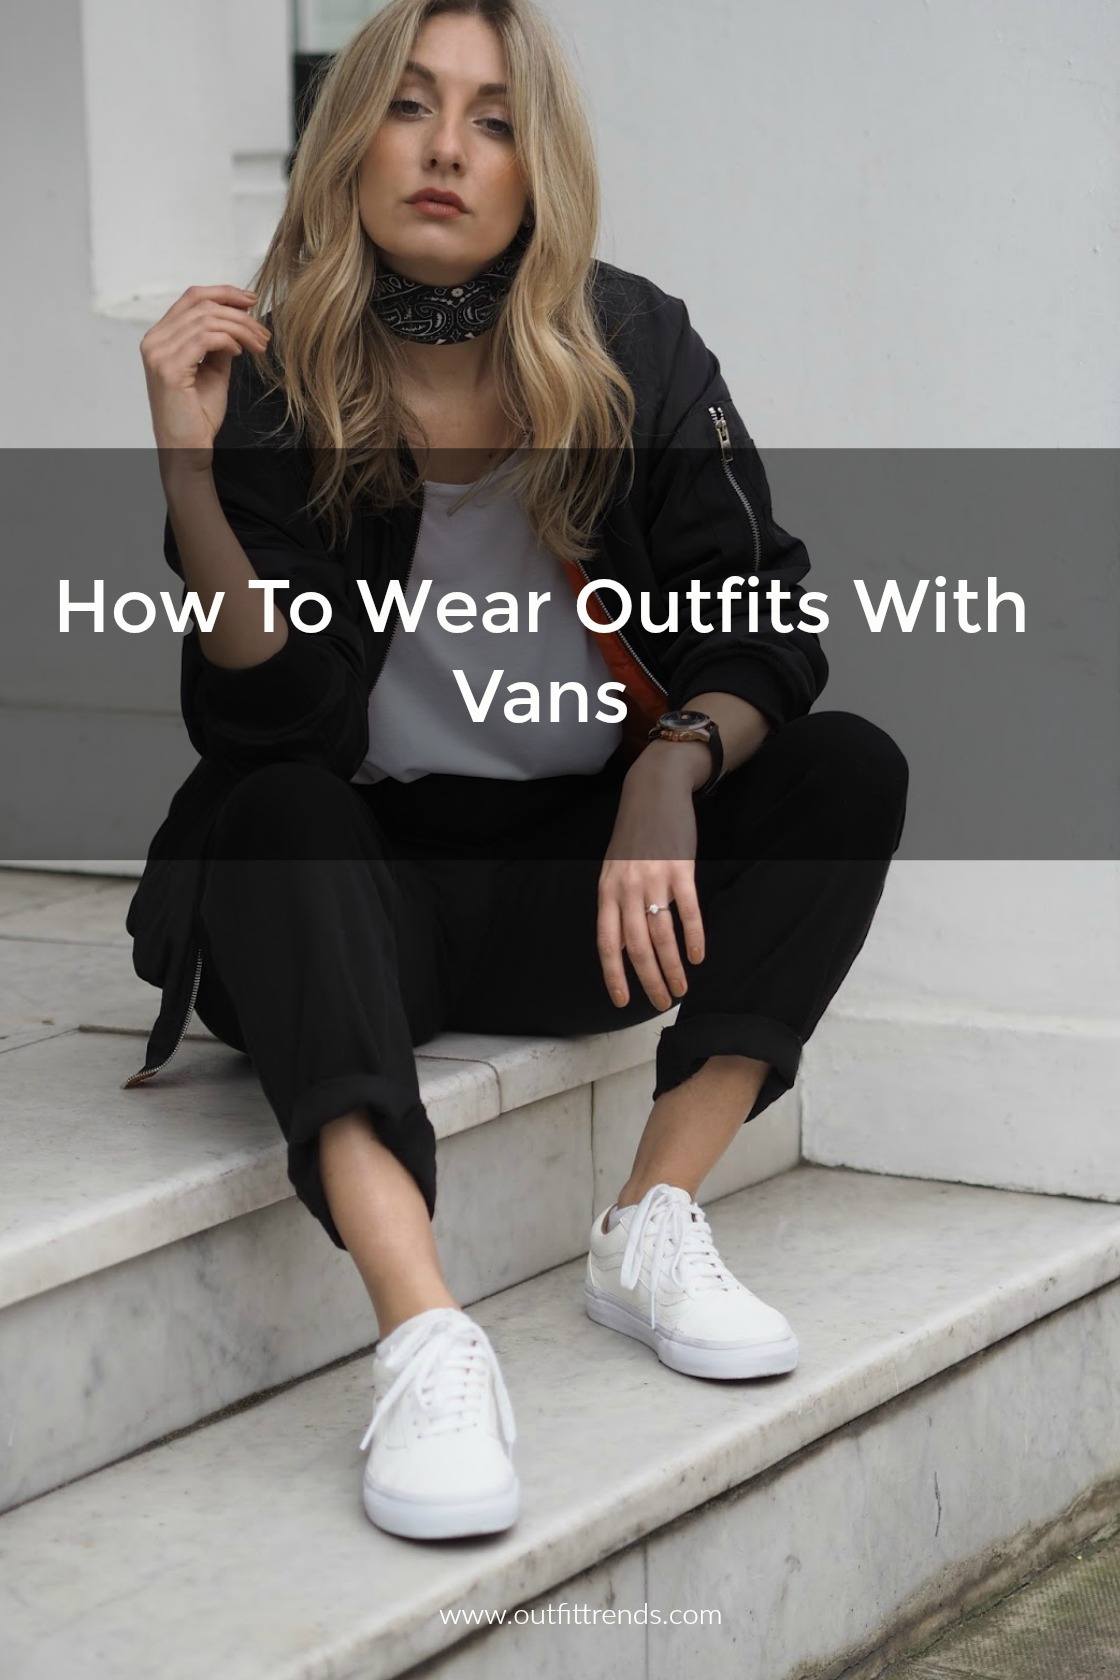 How To Wear Vans What To Wear With Vans! (14 Ways) Her Style Code | vlr ...